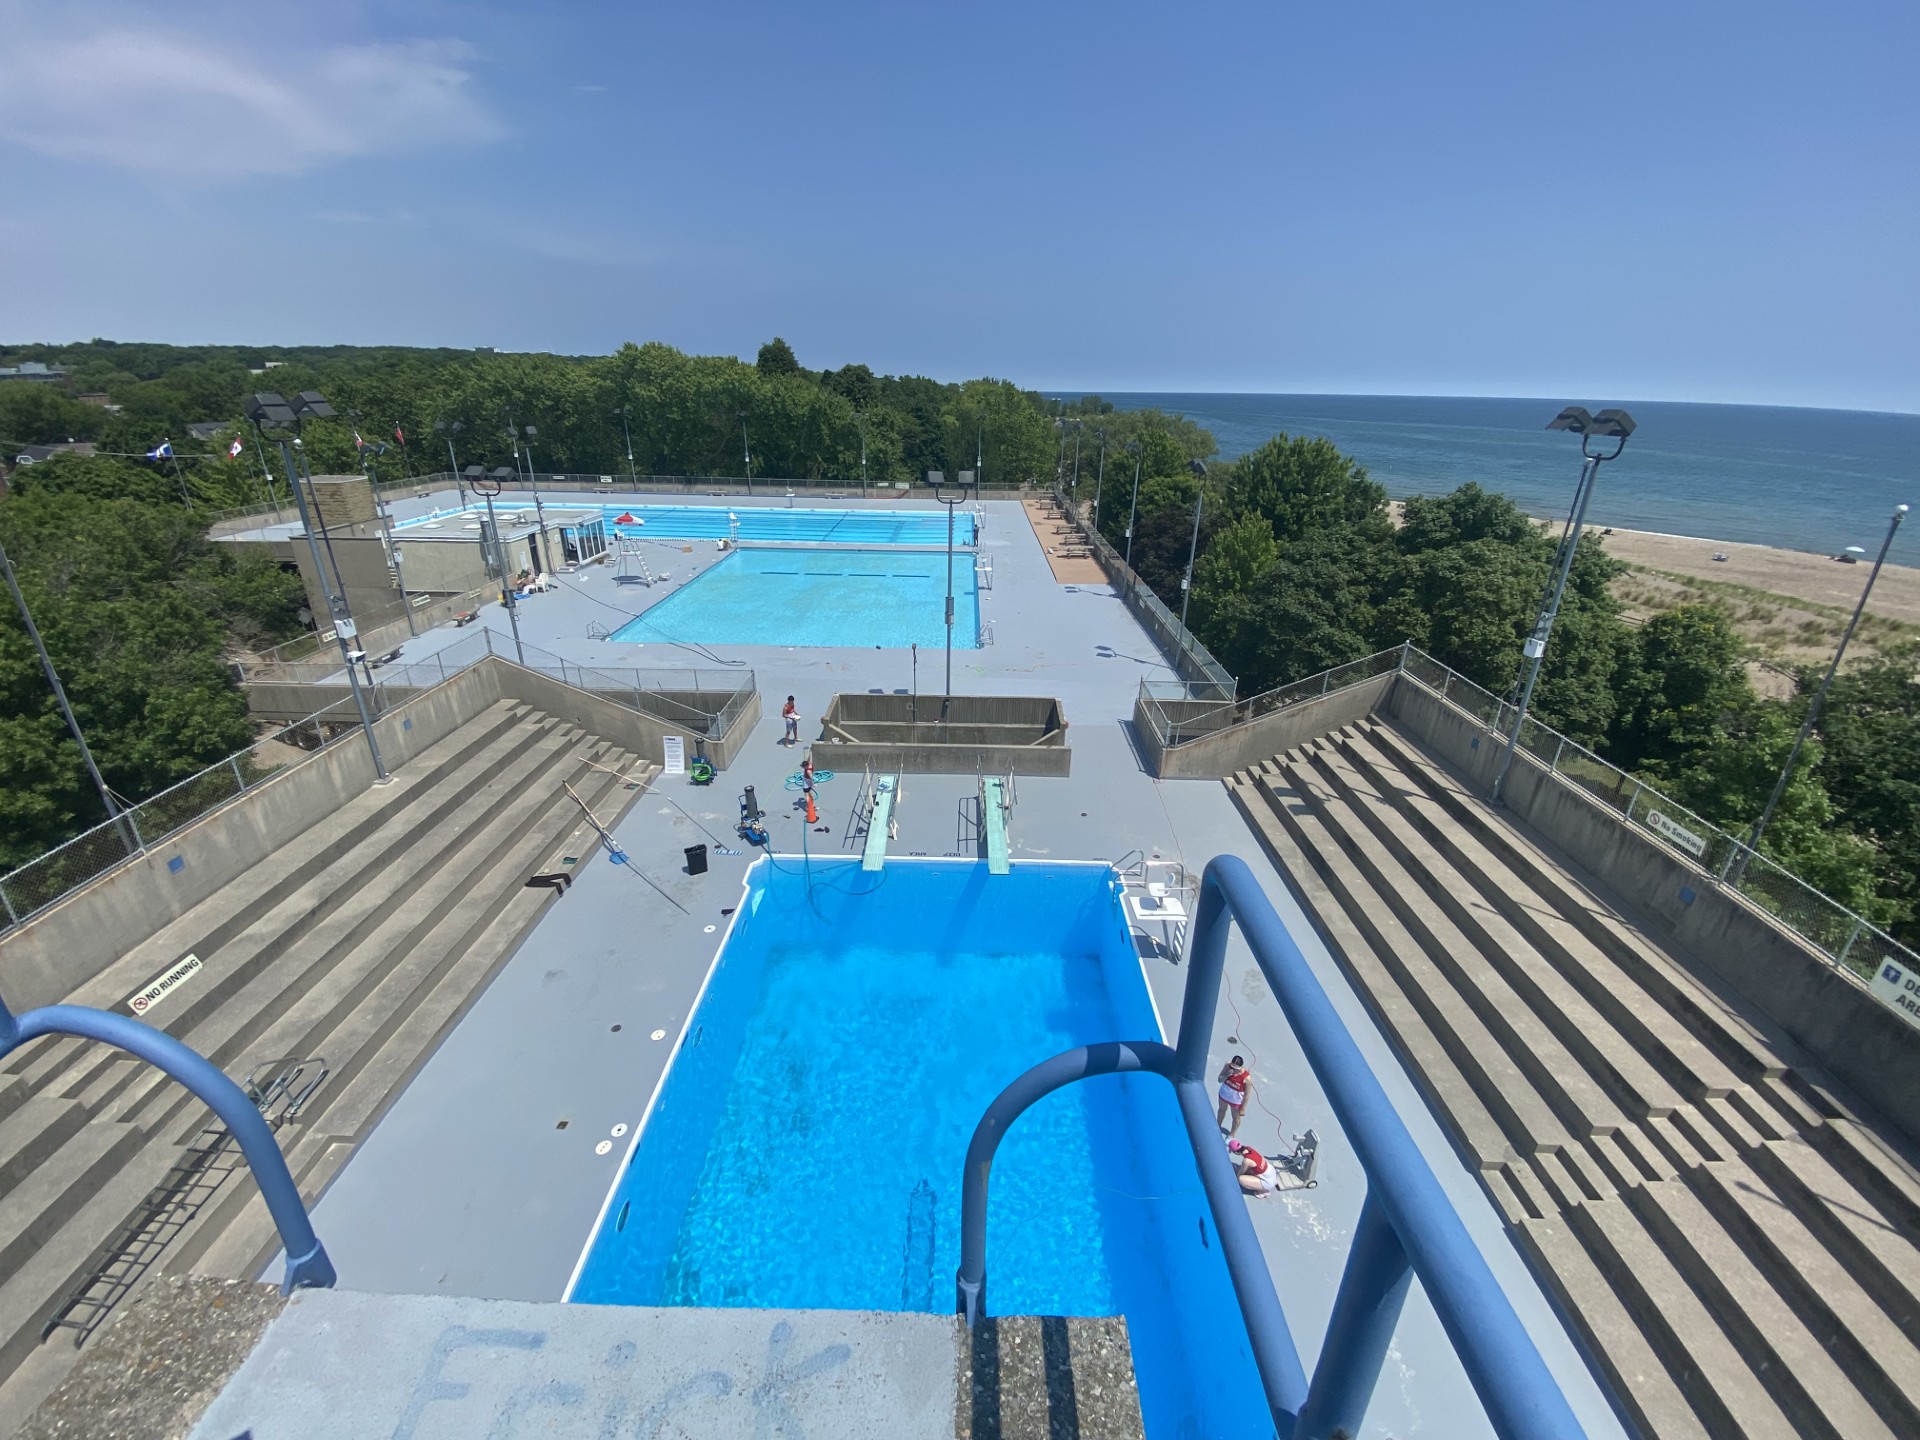 New pools in Toronto finally opening as suffocating heat continues